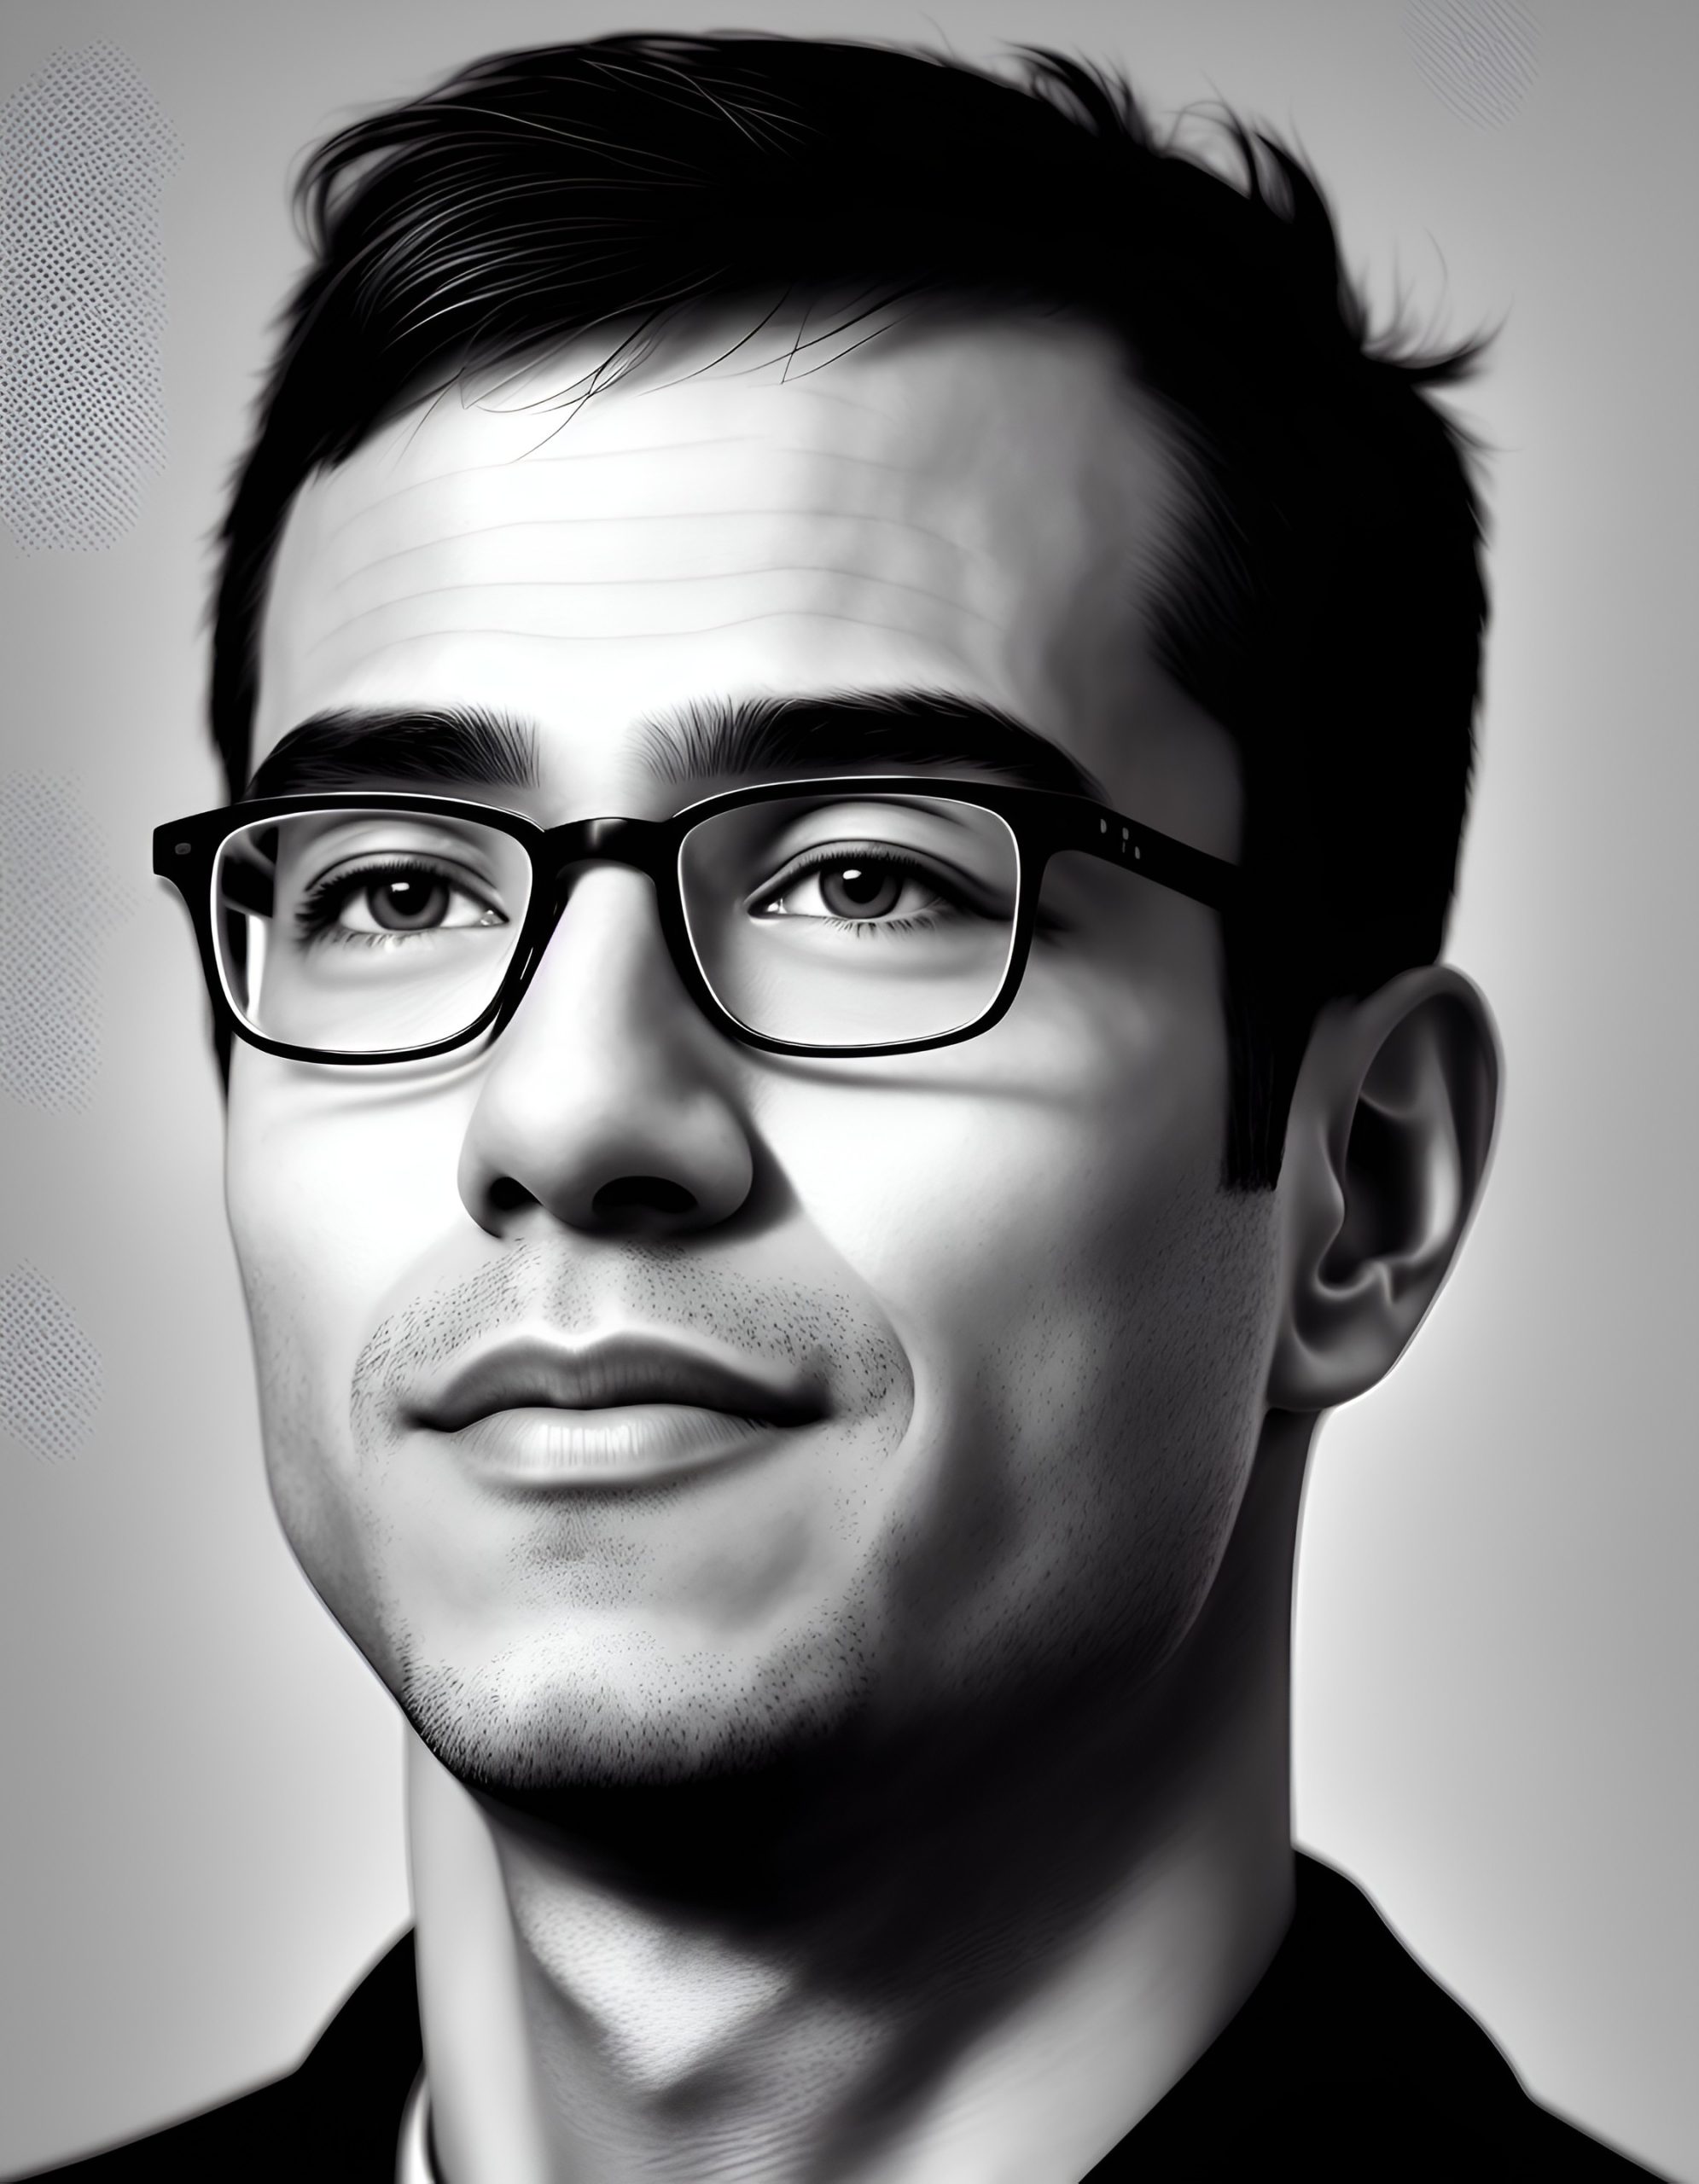 Demis Hassabis: The Visionary Leader Pushing the Boundaries of AI